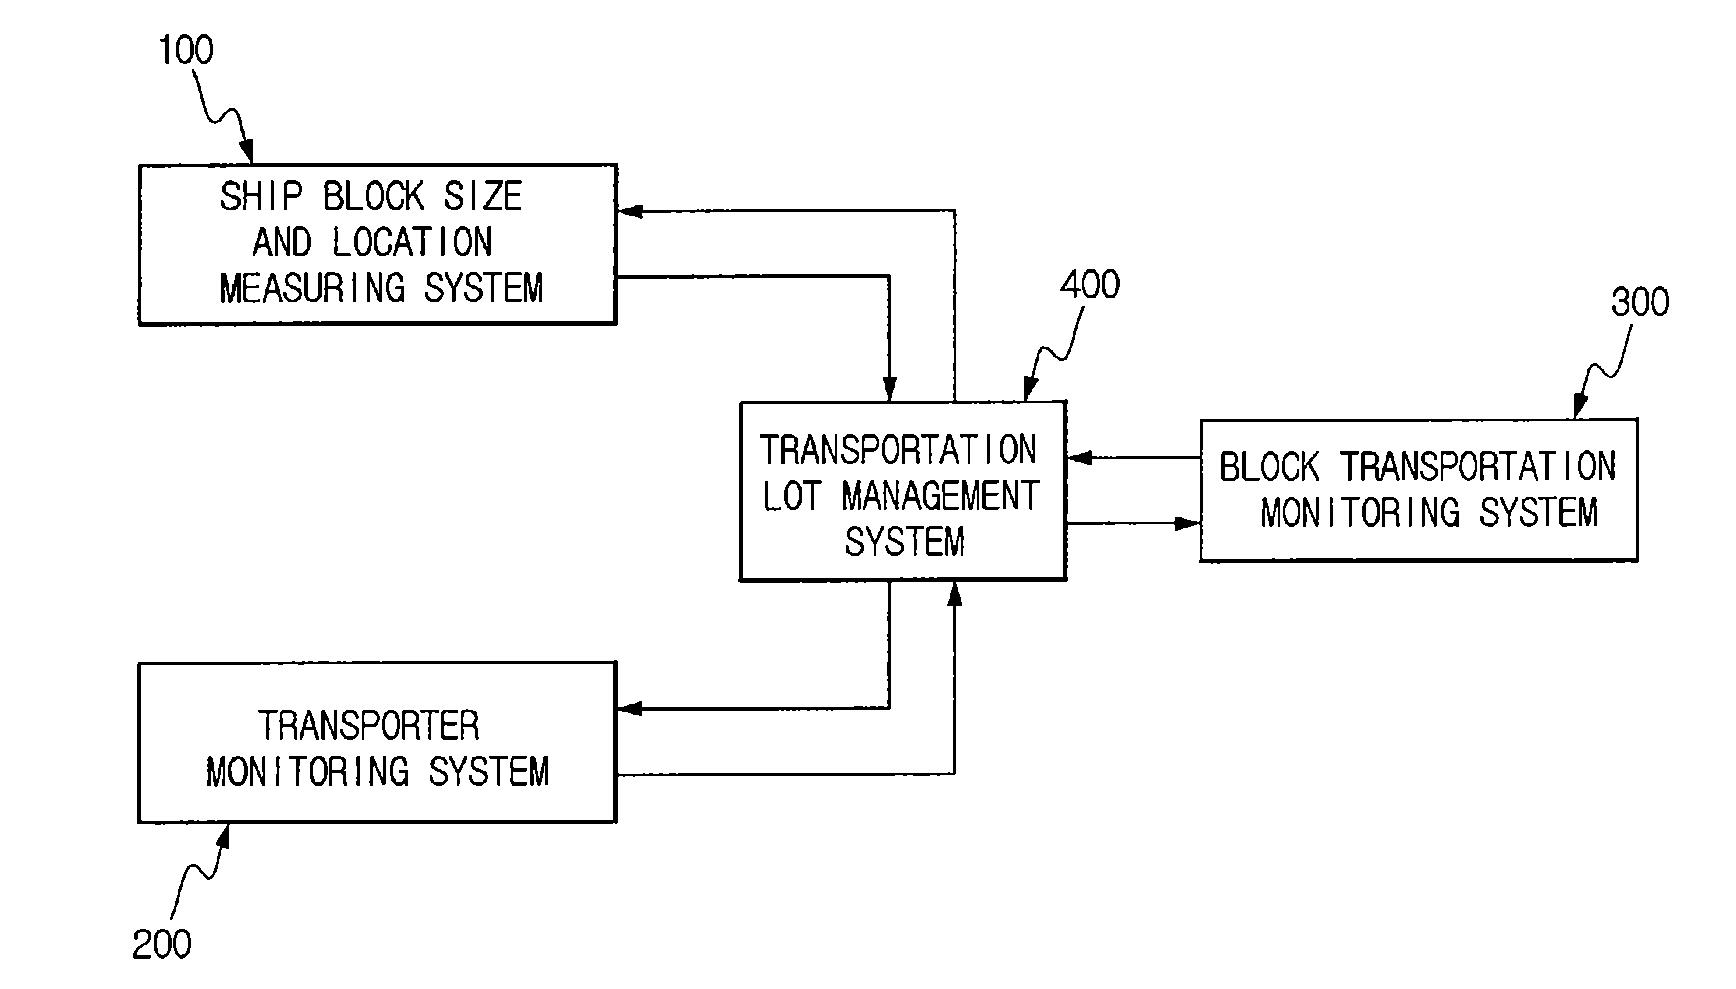 Apparatus for managing the operation of a ship block